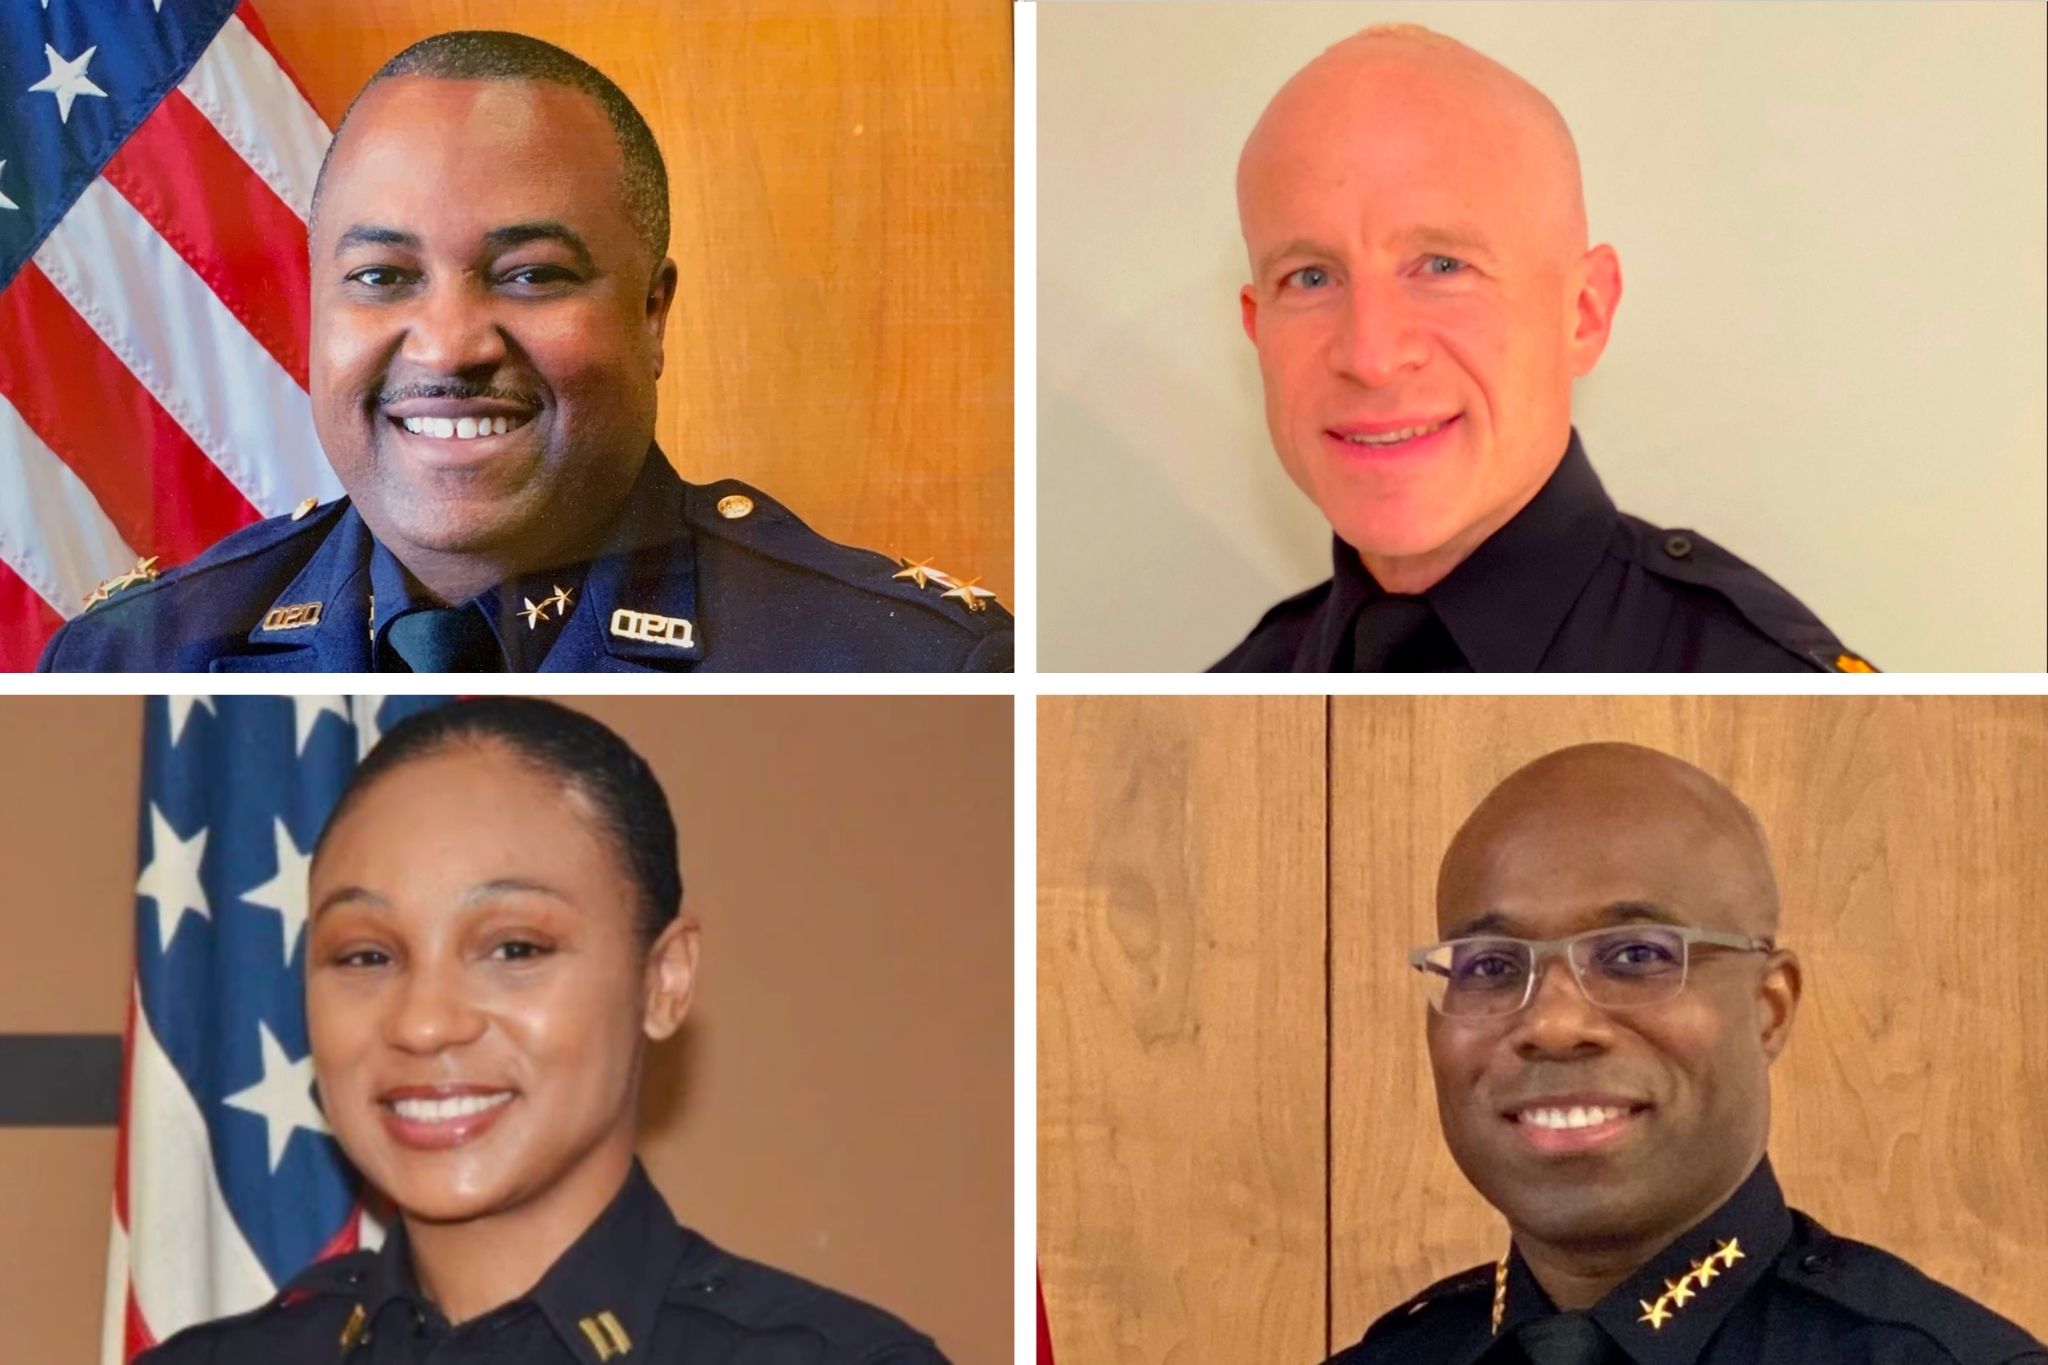 Four finalists being considered for top position at Oakland Police